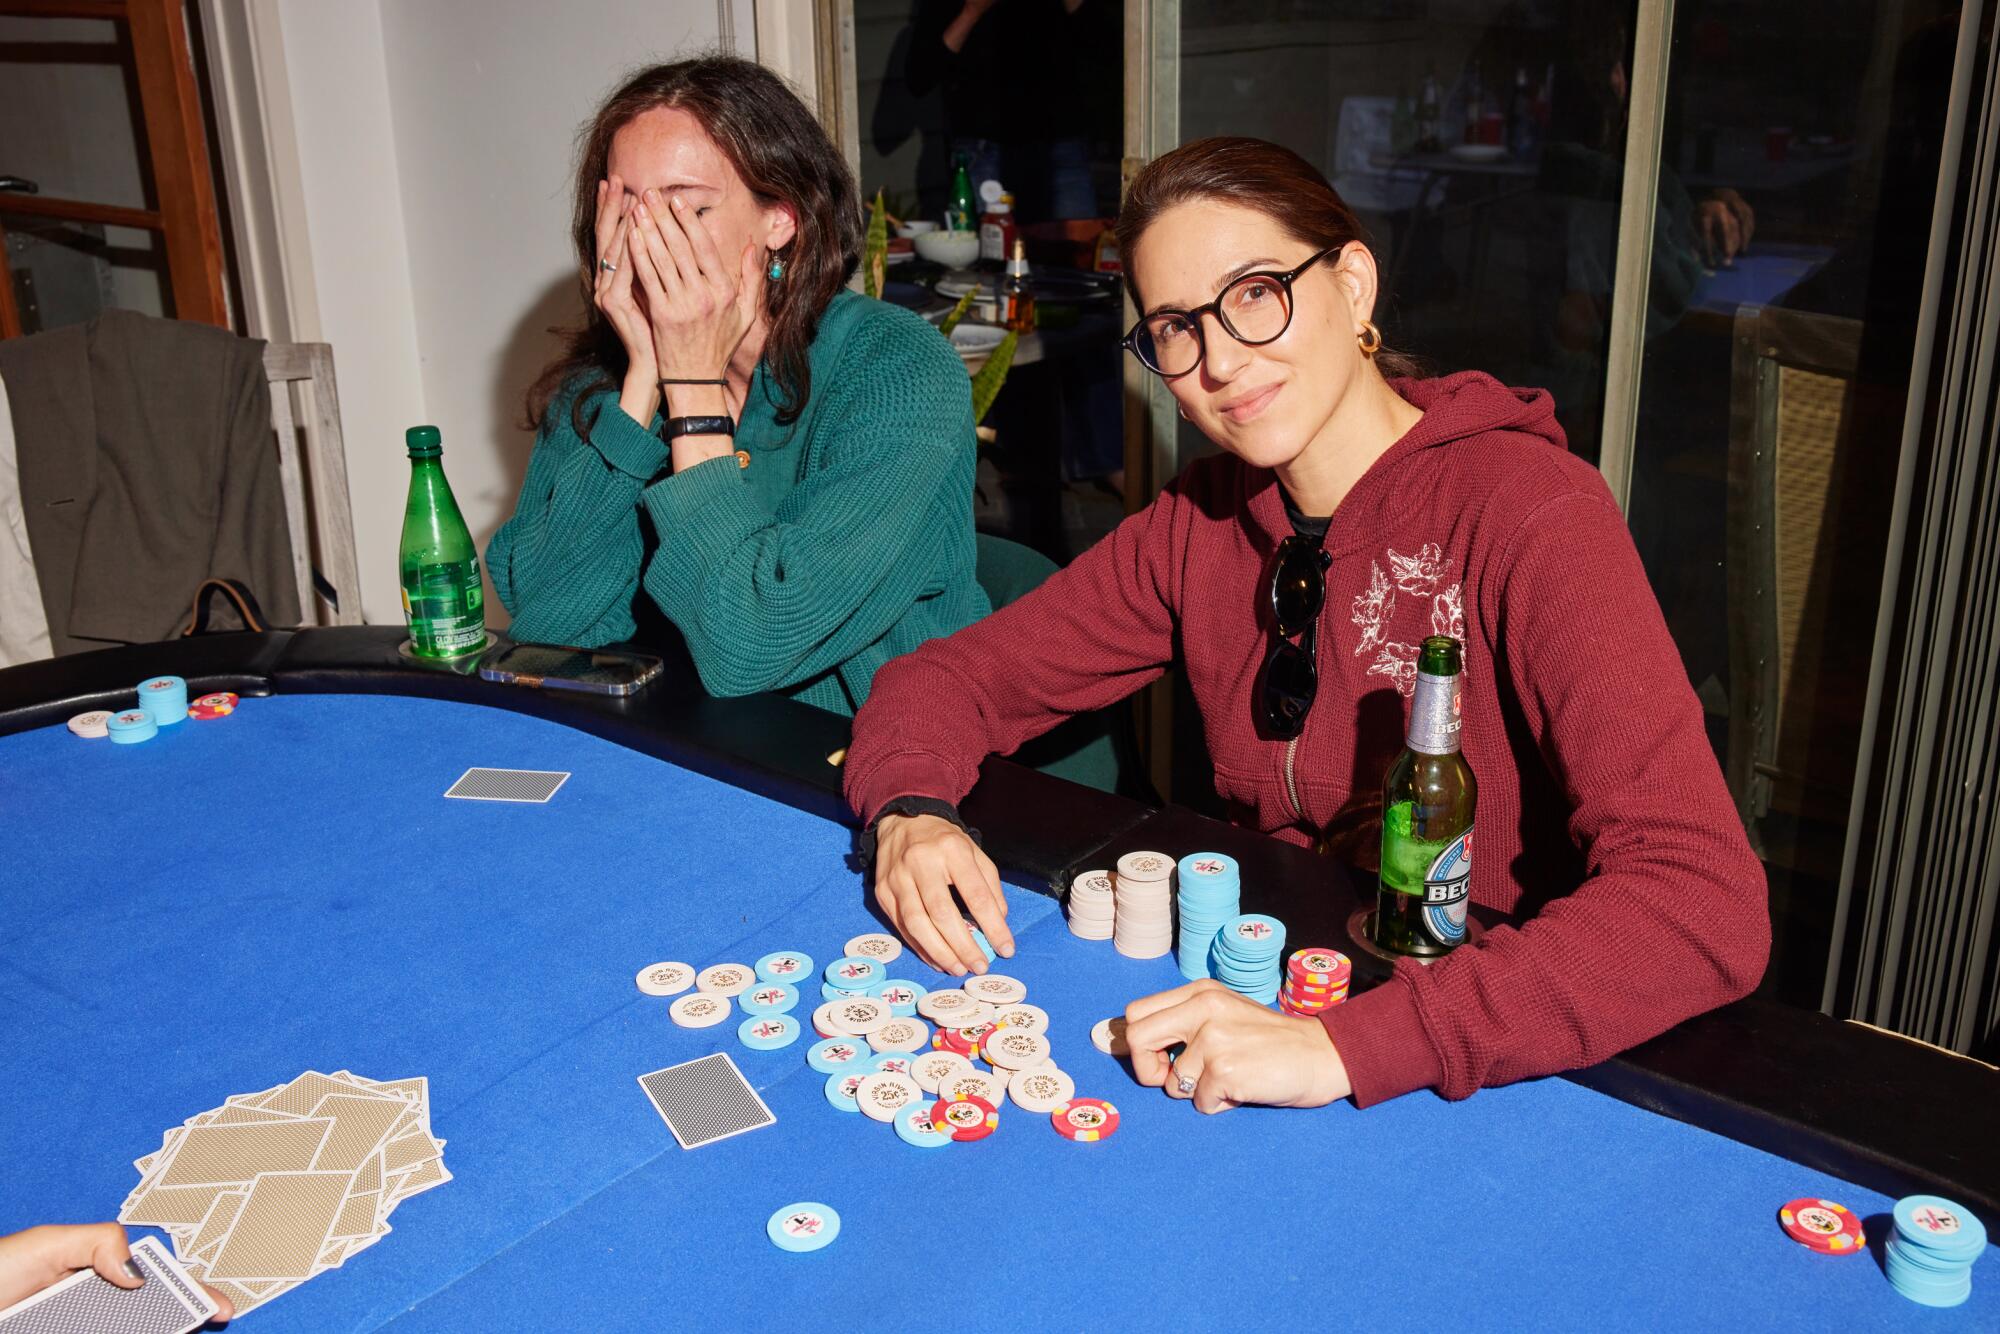 Two women seated at a poker table, one covering her face, the other raking in the chips